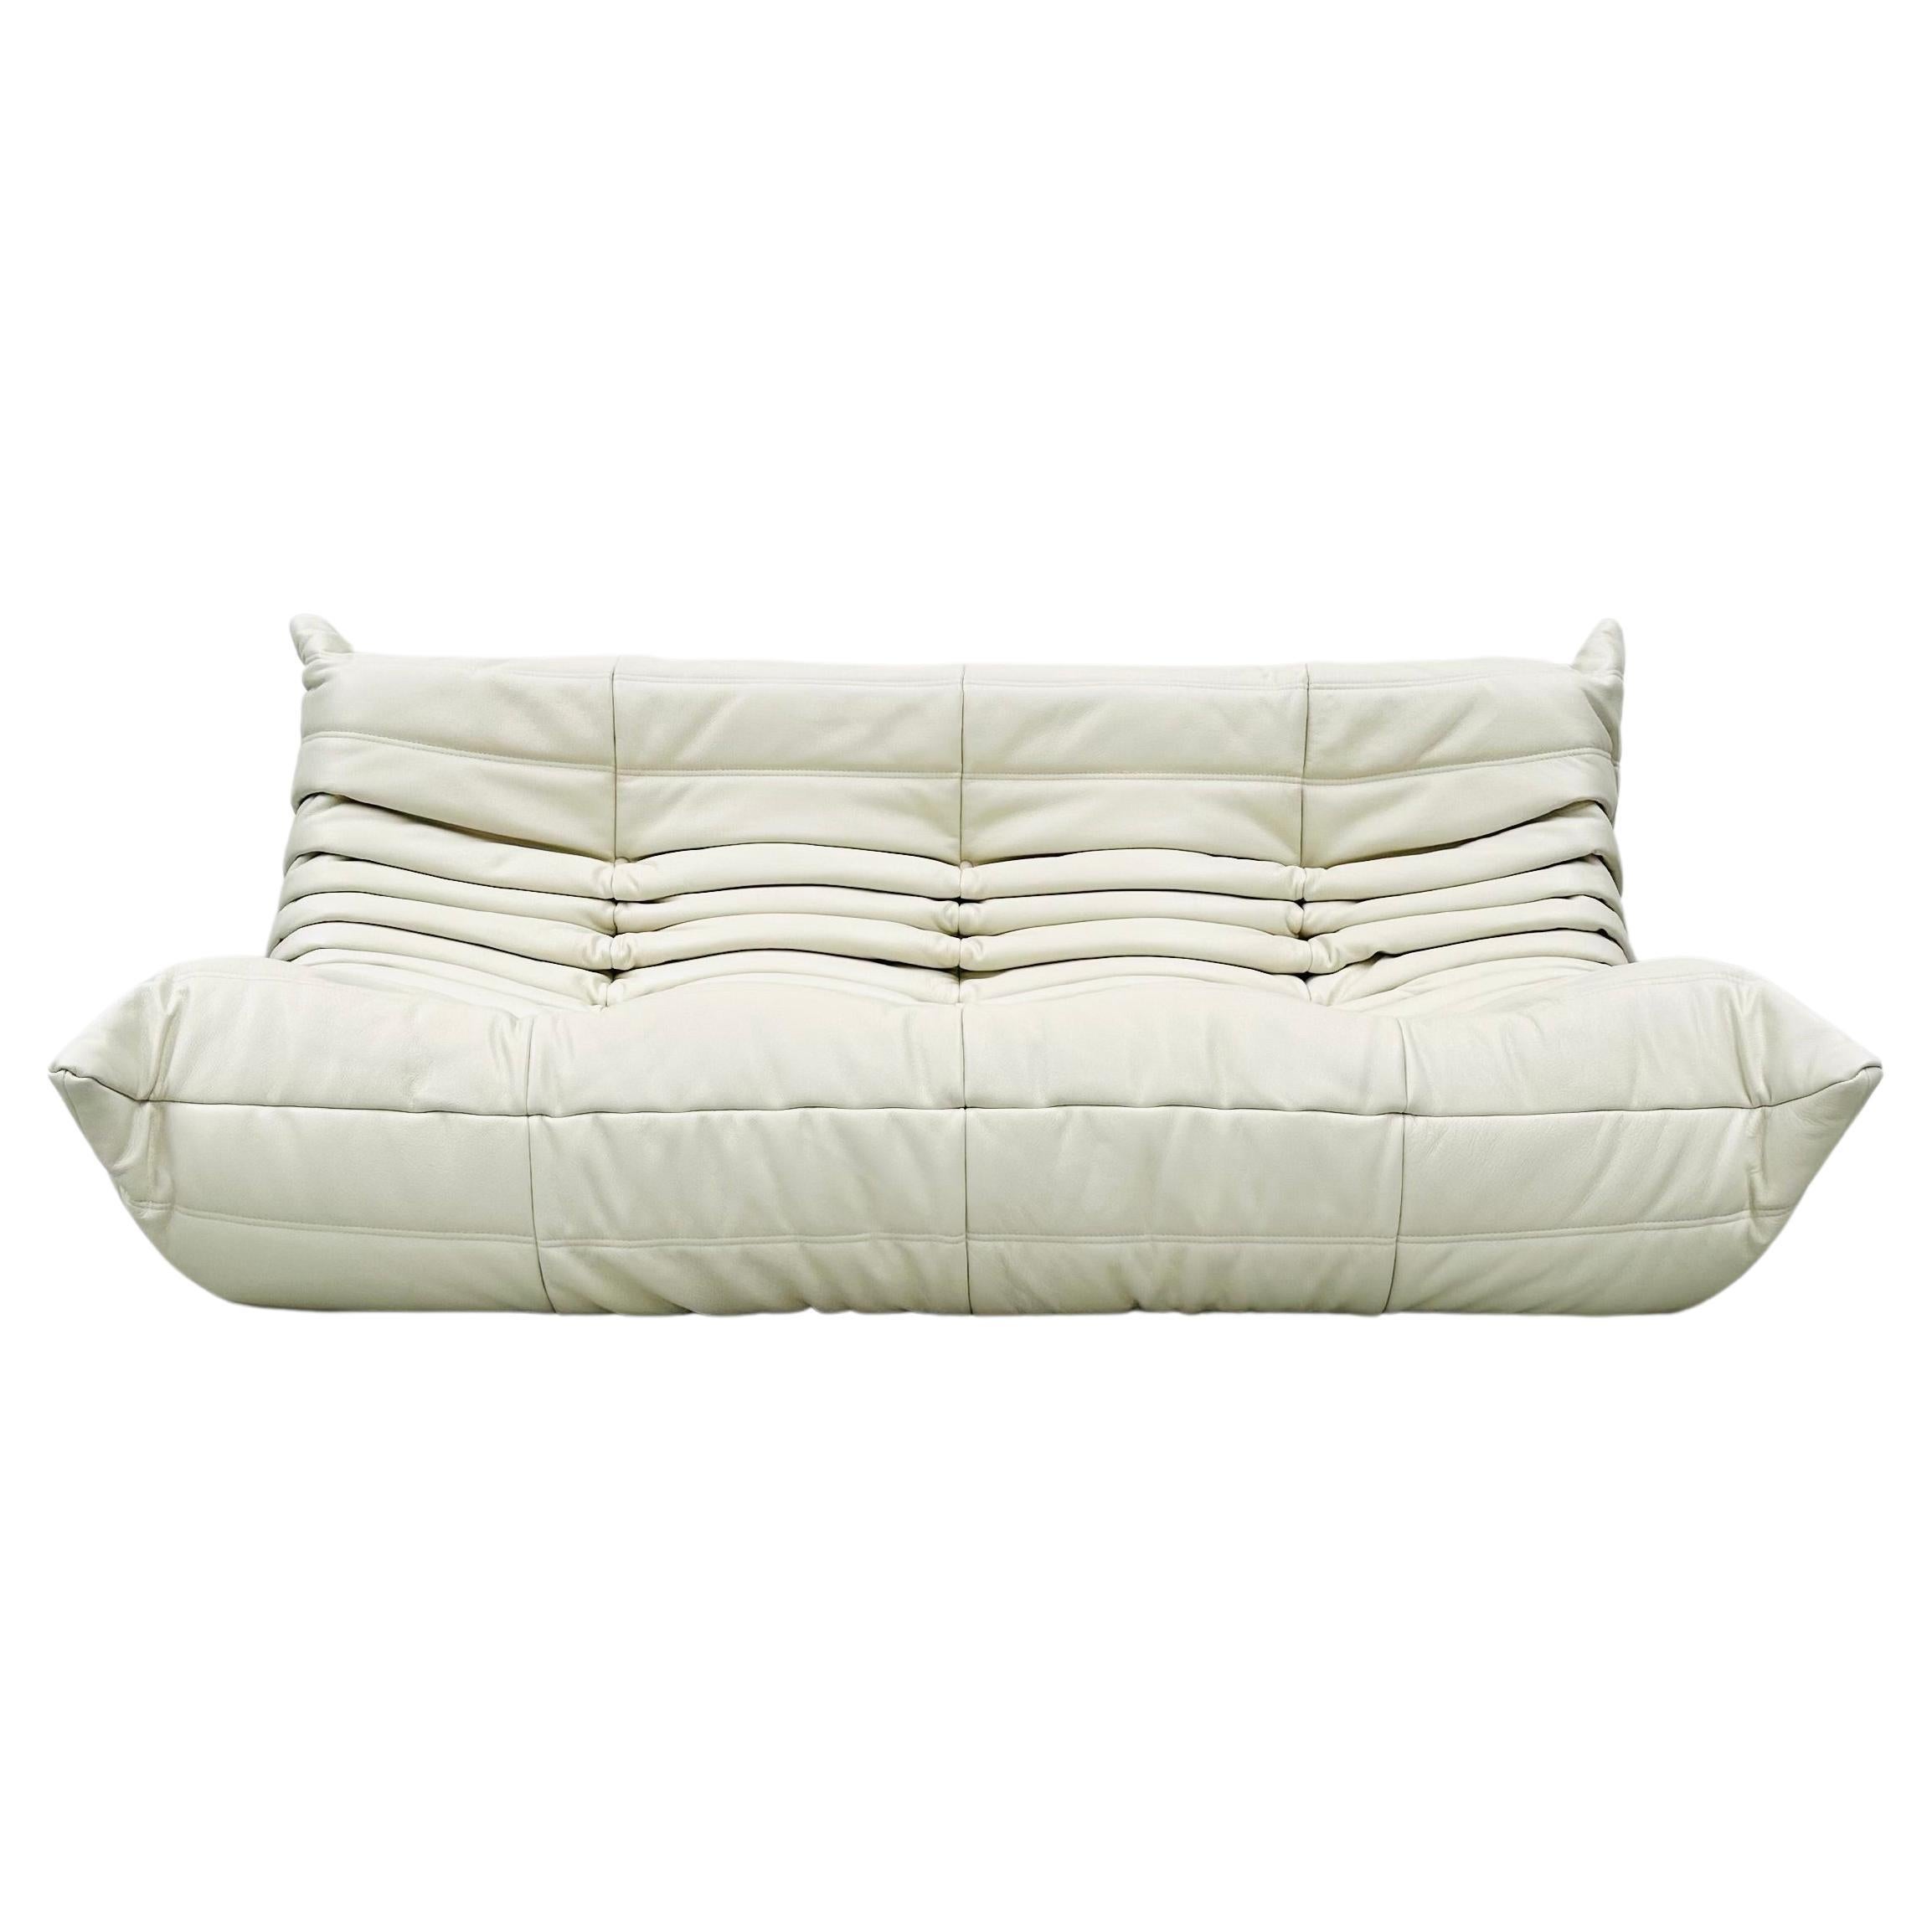 French Vintage Togo Sofa in White Leather by Michel Ducaroy for Ligne Roset.